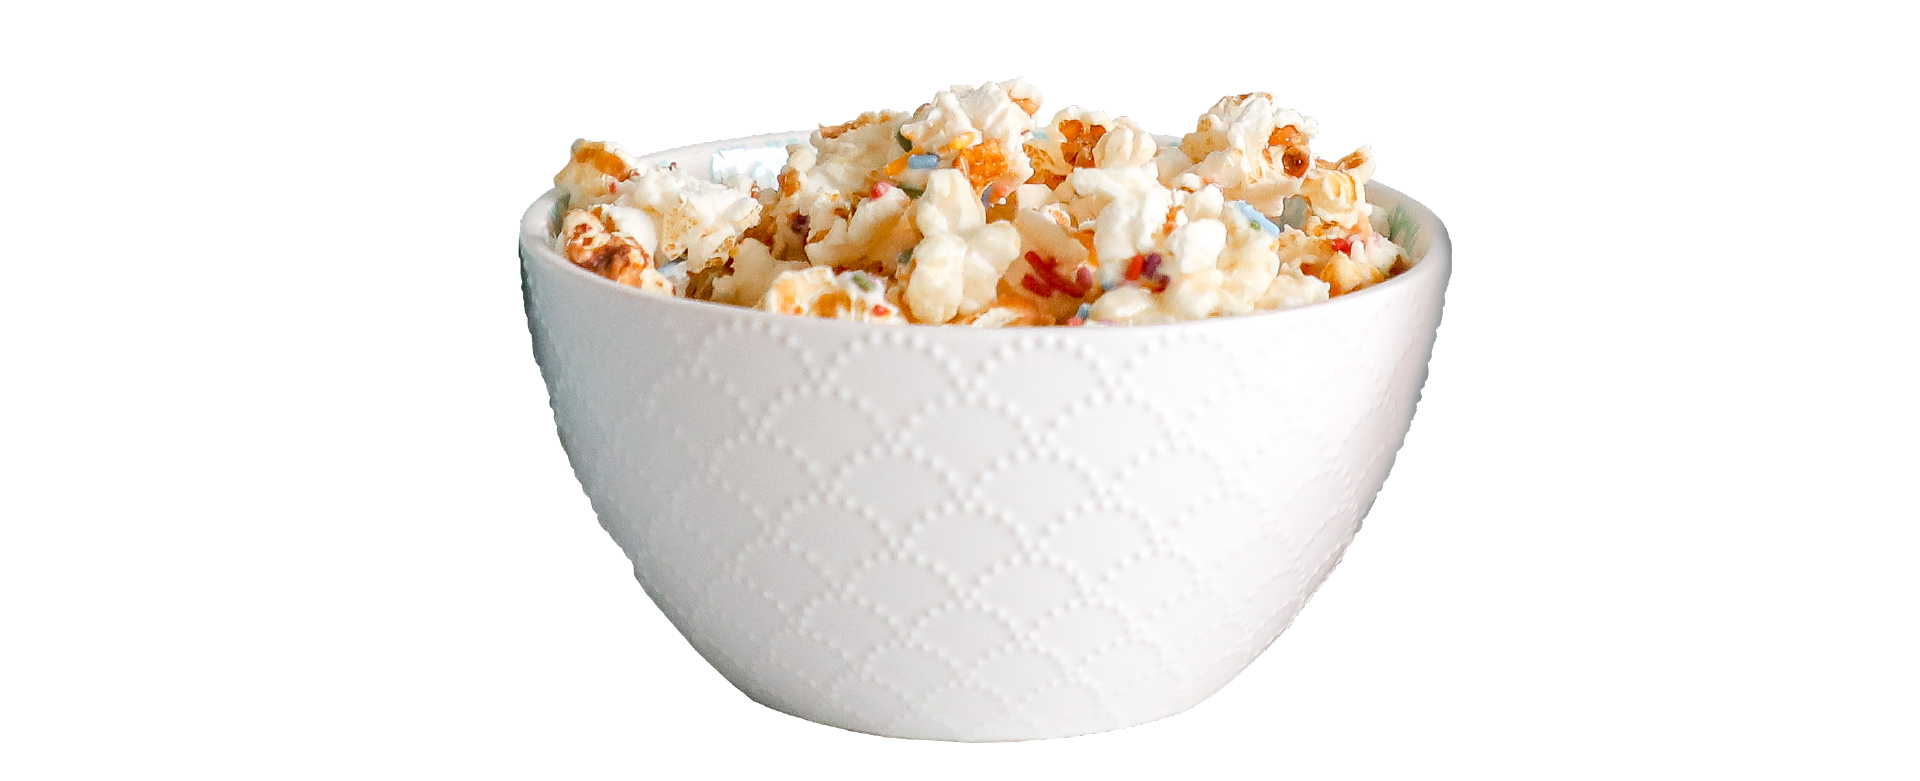 bowl of drizzled popcorn